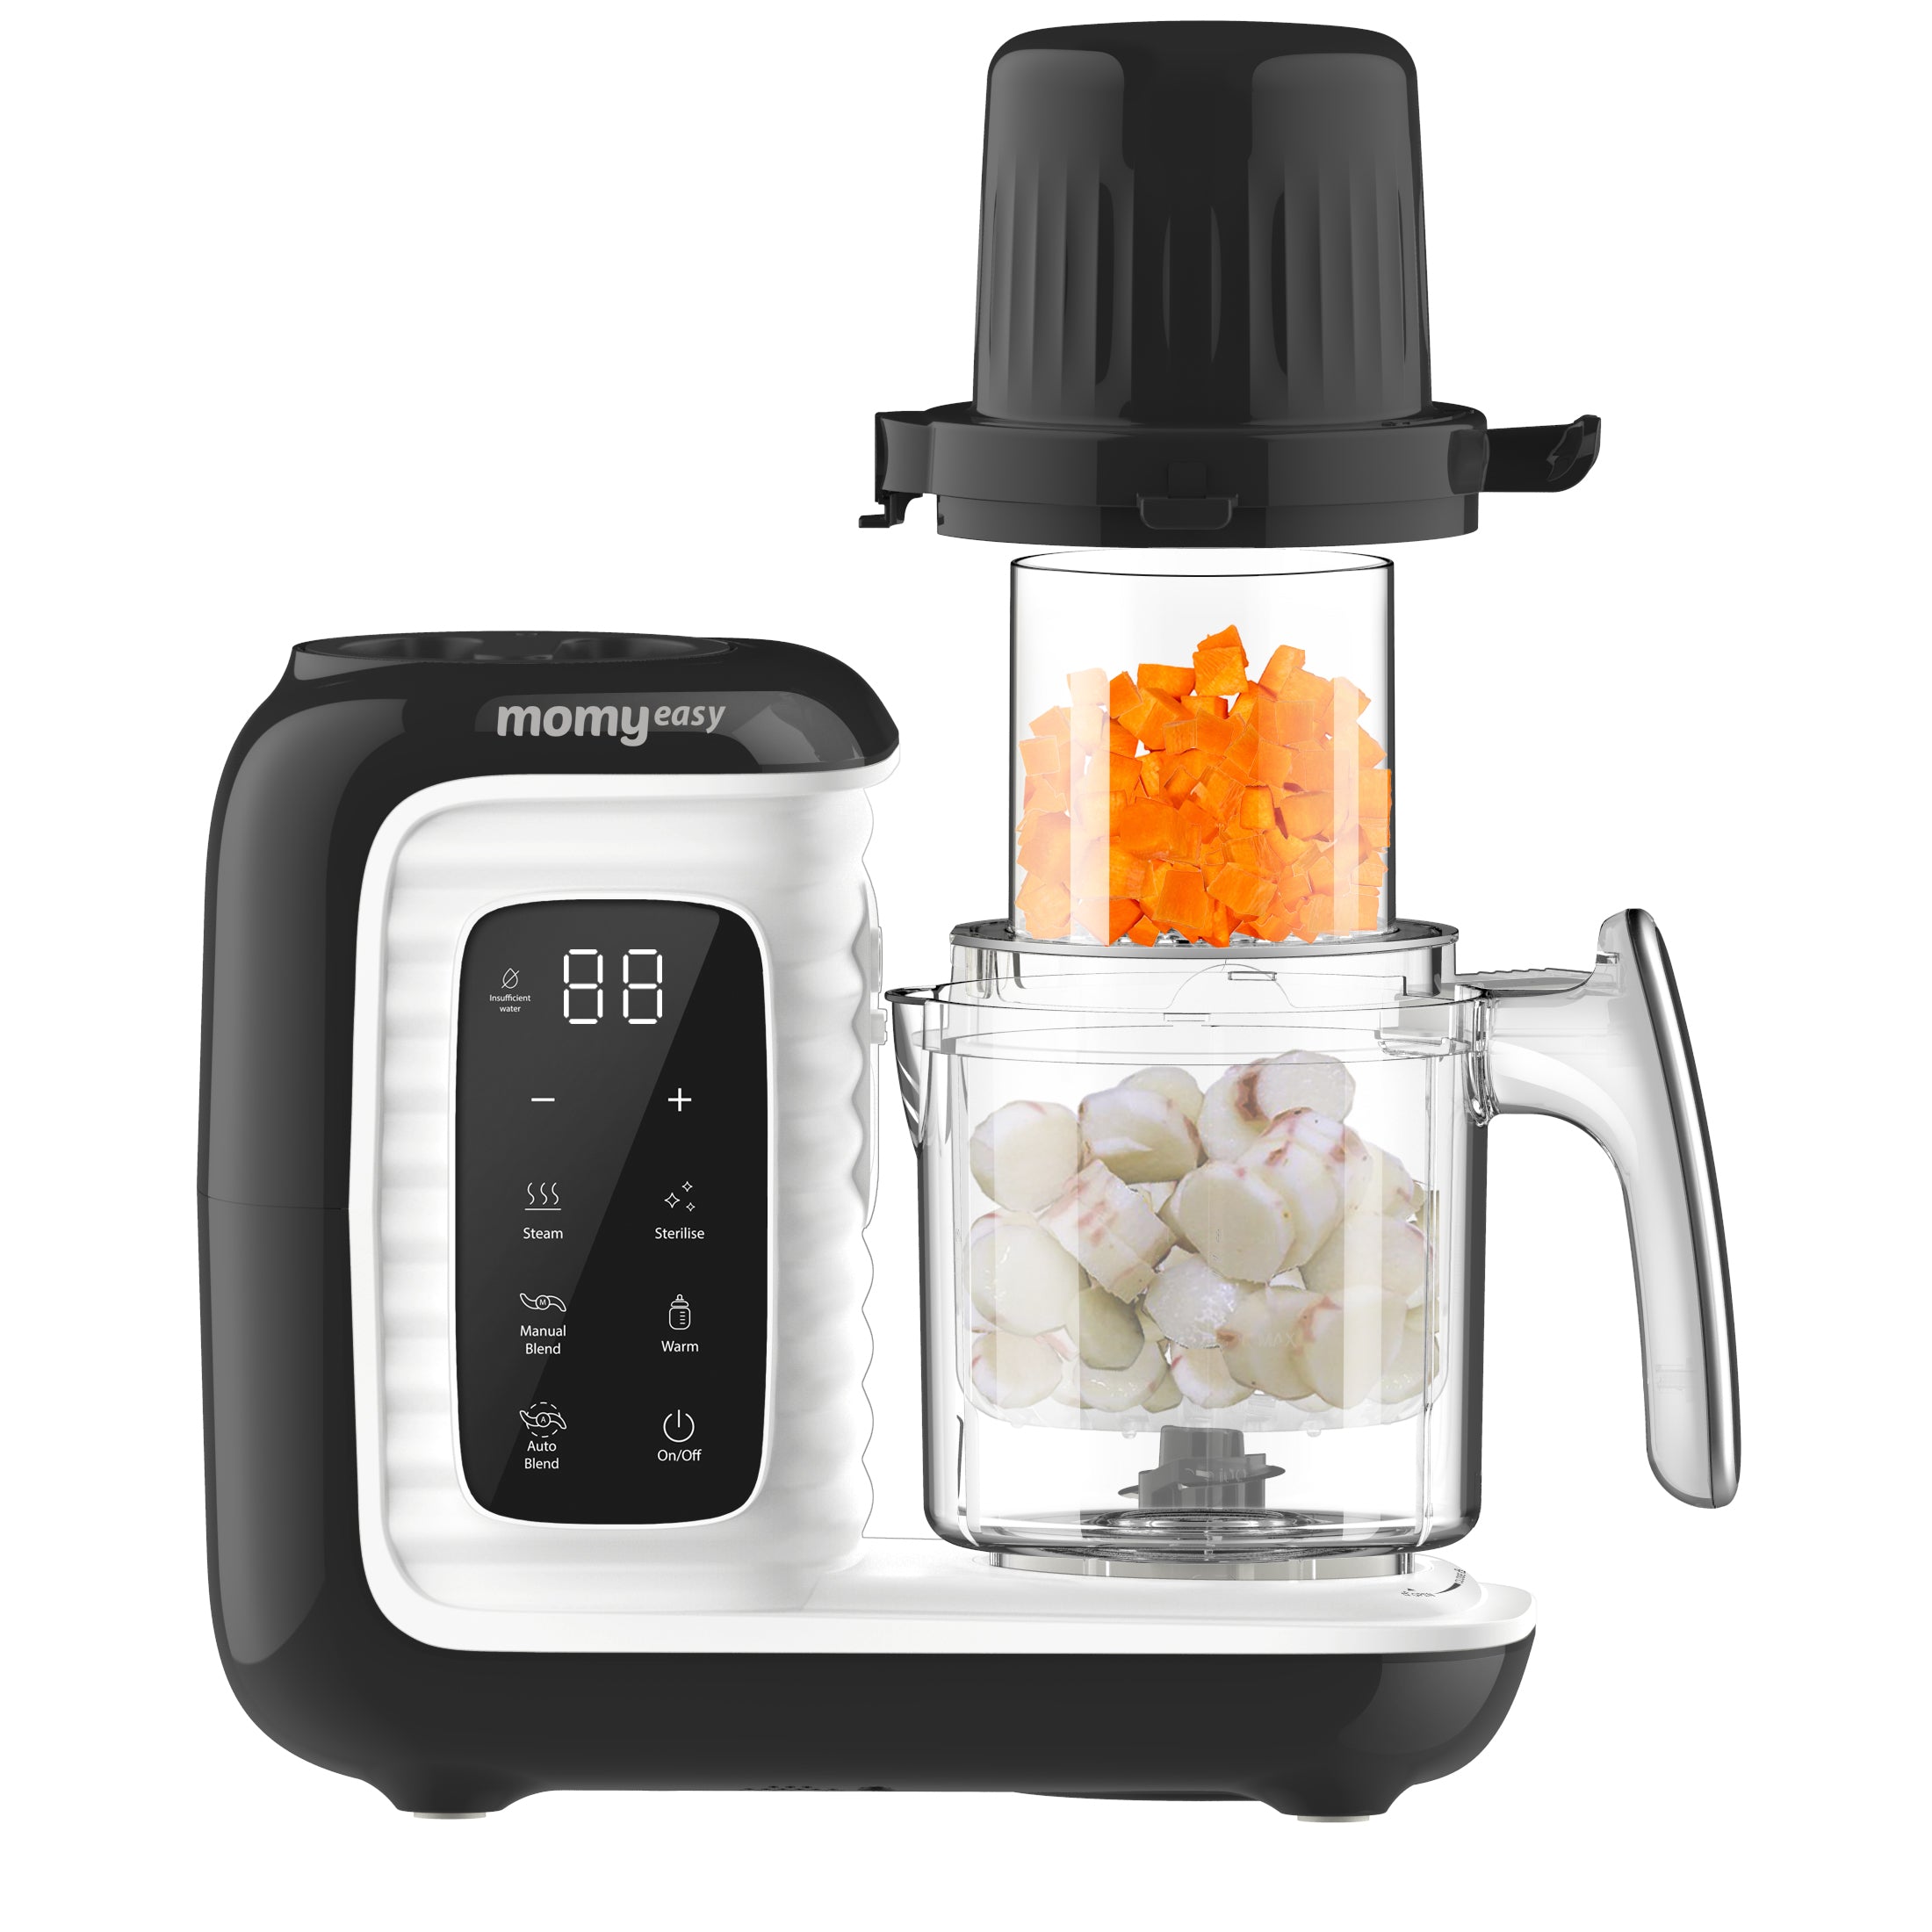 BUAIAHUG Baby Food Maker,10 in 1 Baby Food Processor Puree Machine,  Steamer, Blender, Cooker, Masher, Puree, Keep Warm and Timer,Dishwasher  Safe